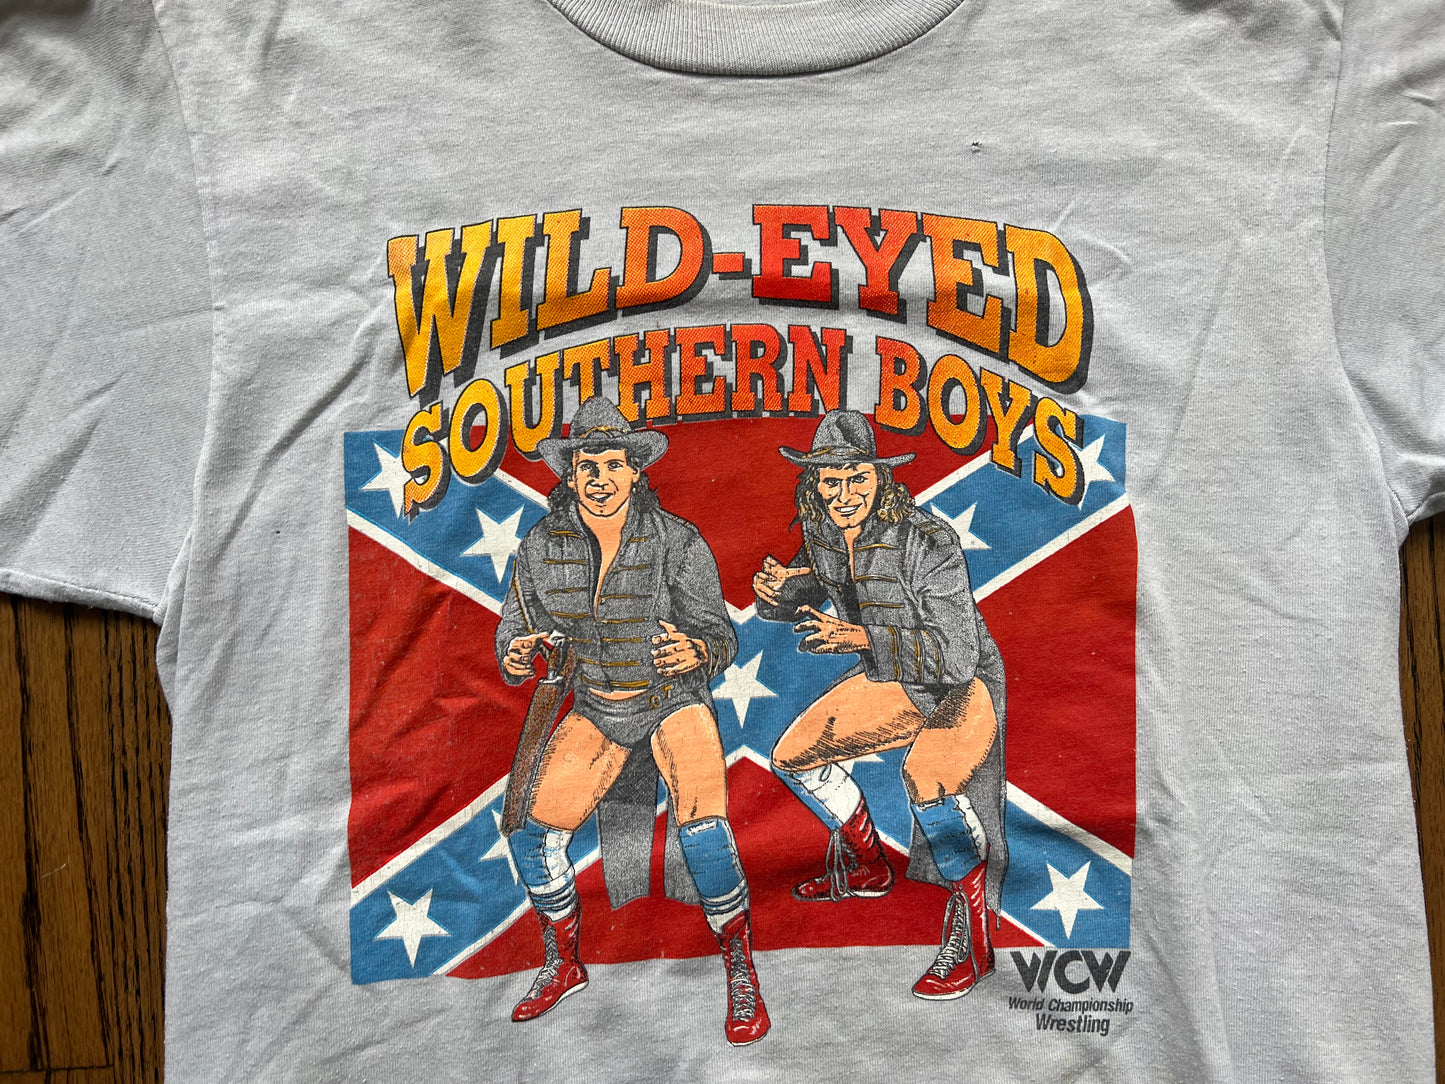 1991 WCW Wild-Eyed Southern Boys shirt featuring Steve Armstrong and Tracy Smothers